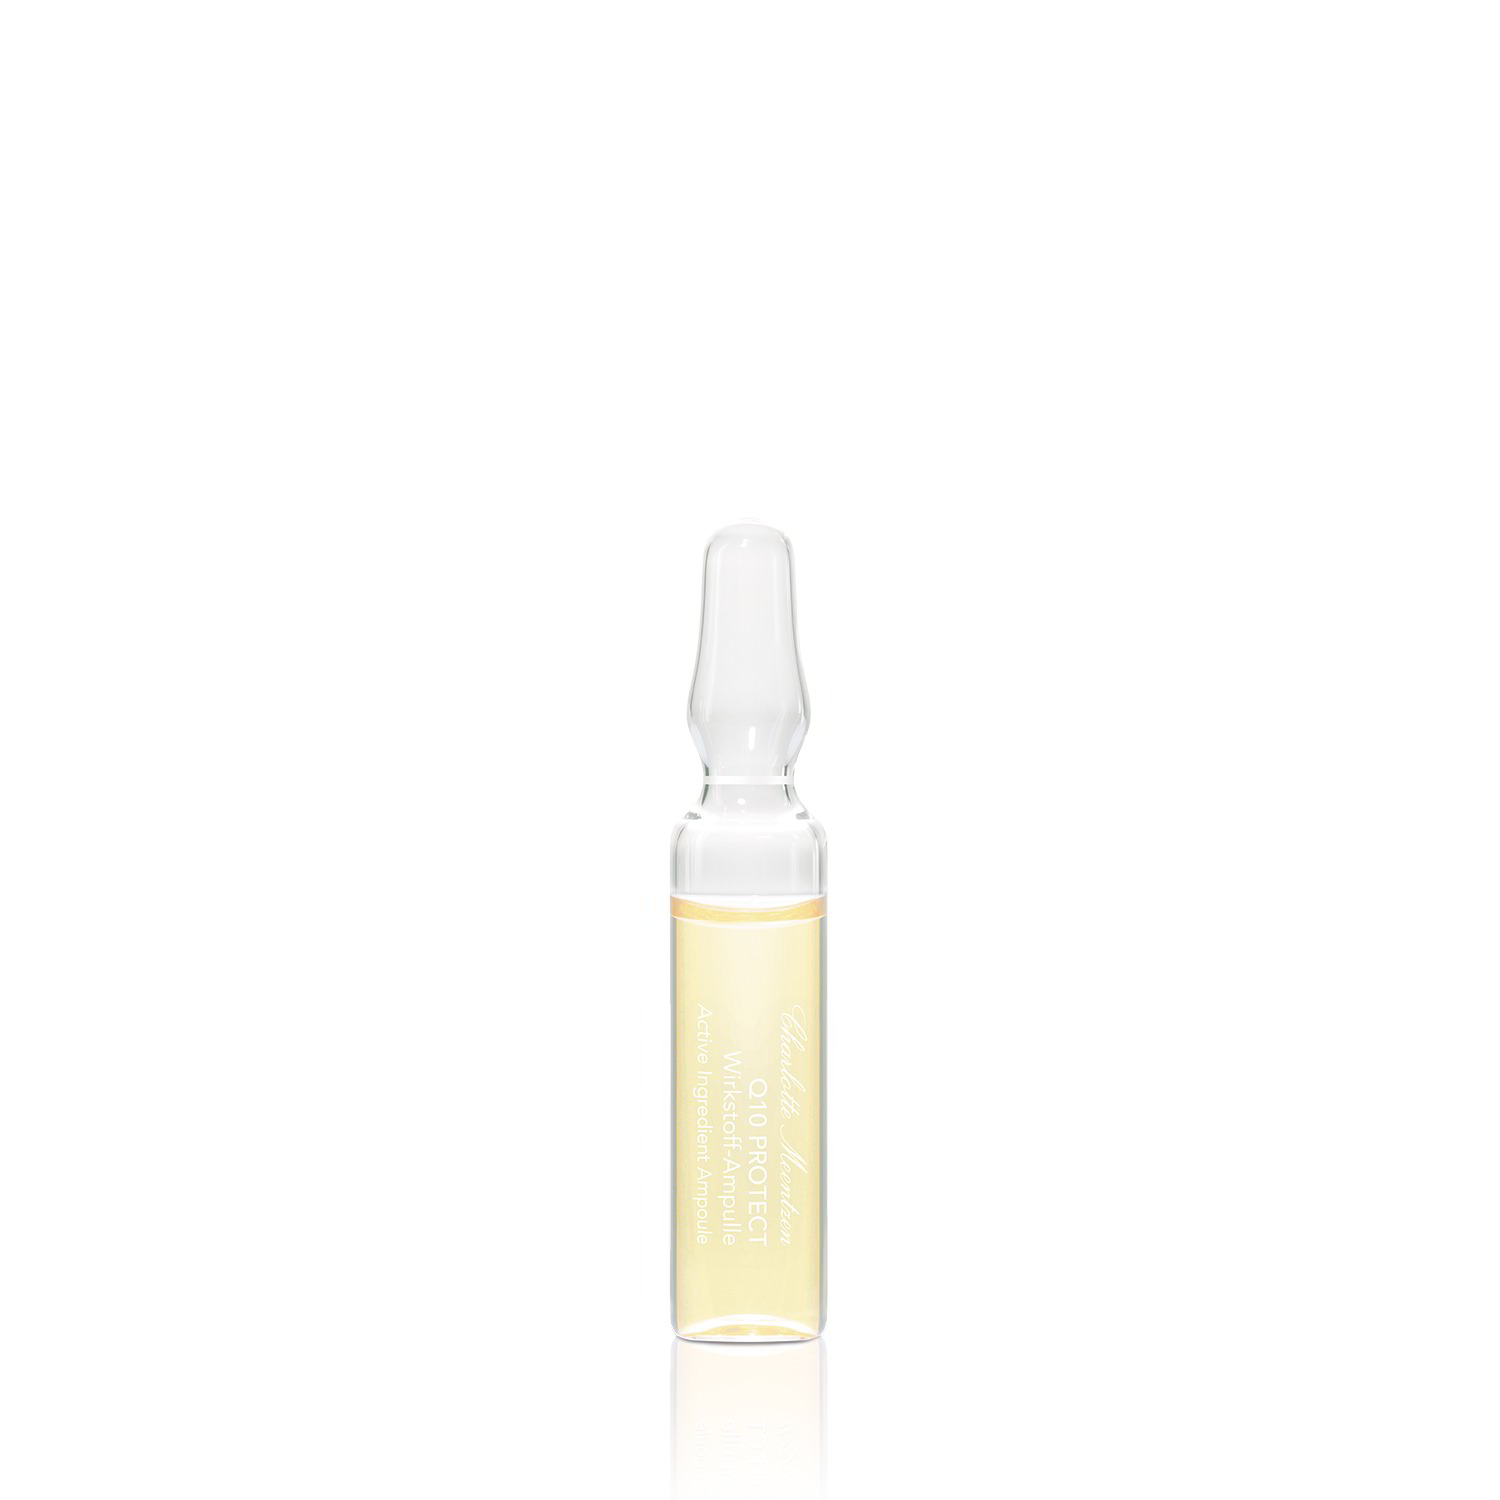 Q10 Protect  Active Ingedient Ampoules 5 x 2 ml